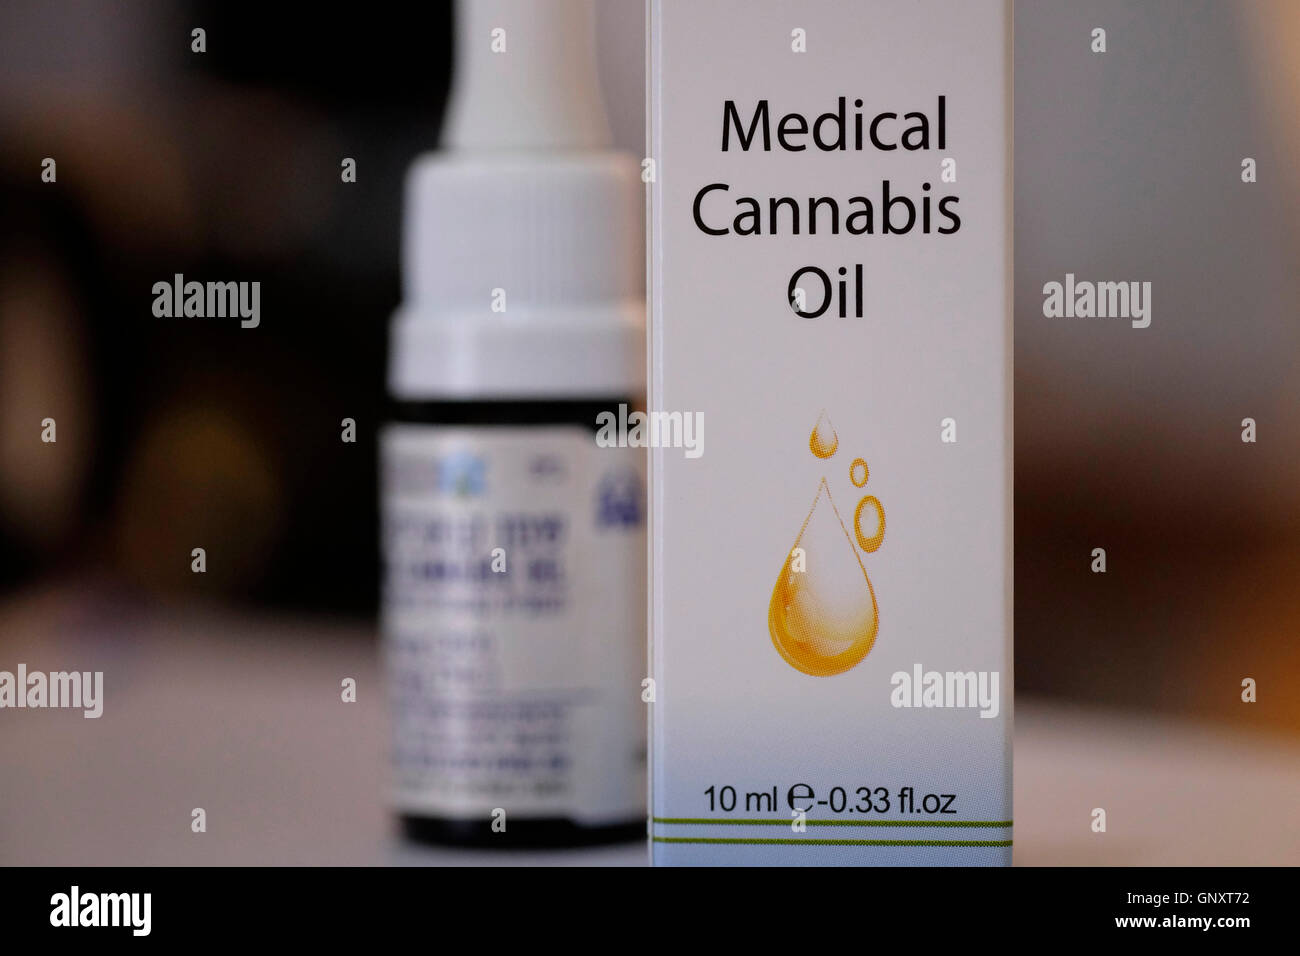 Medical marijuana product is seen at a dispensary belonging to Tikun Olam, Israel's largest medical marijuana supplier in Tel Aviv on 01 September 2016. Israel is emerging as a world leader on the science of medical marijuana. In June, Israel approved a plan to ease restrictions on growing medical marijuana and announced that medical marijuana would eventually become a major growth and export industry. Stock Photo